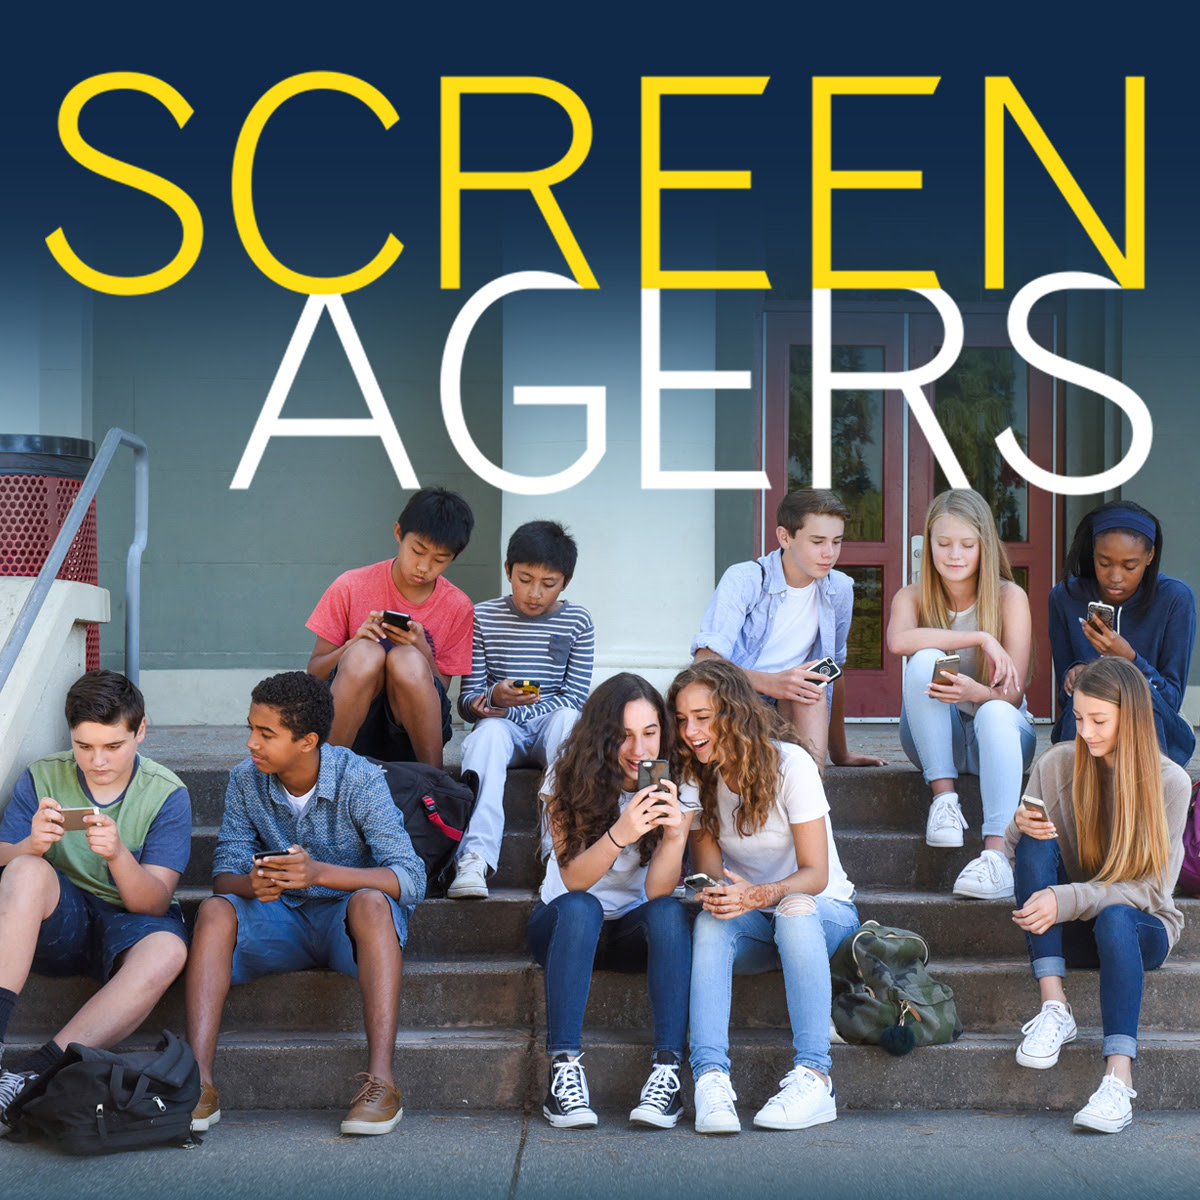 Screenagers Film Presented By Kent County Prevention Coalition